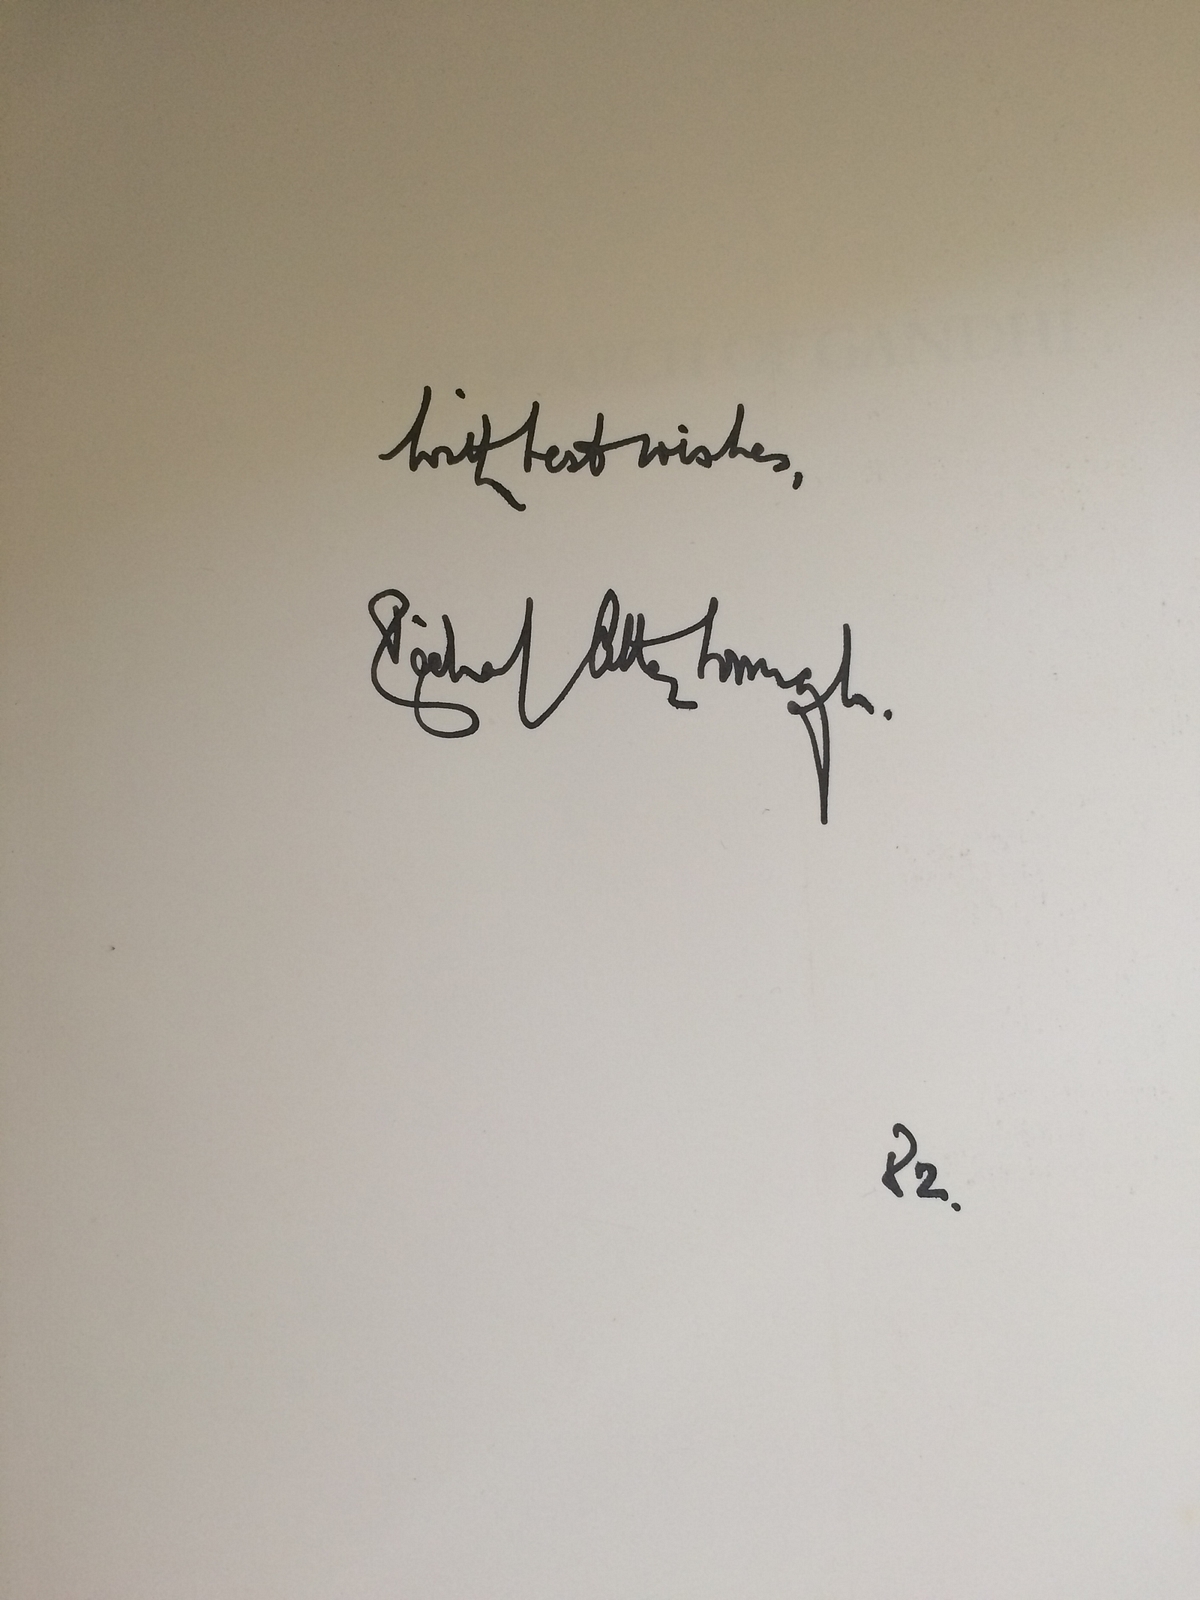 Copy signed by none other than Richard Attenborough